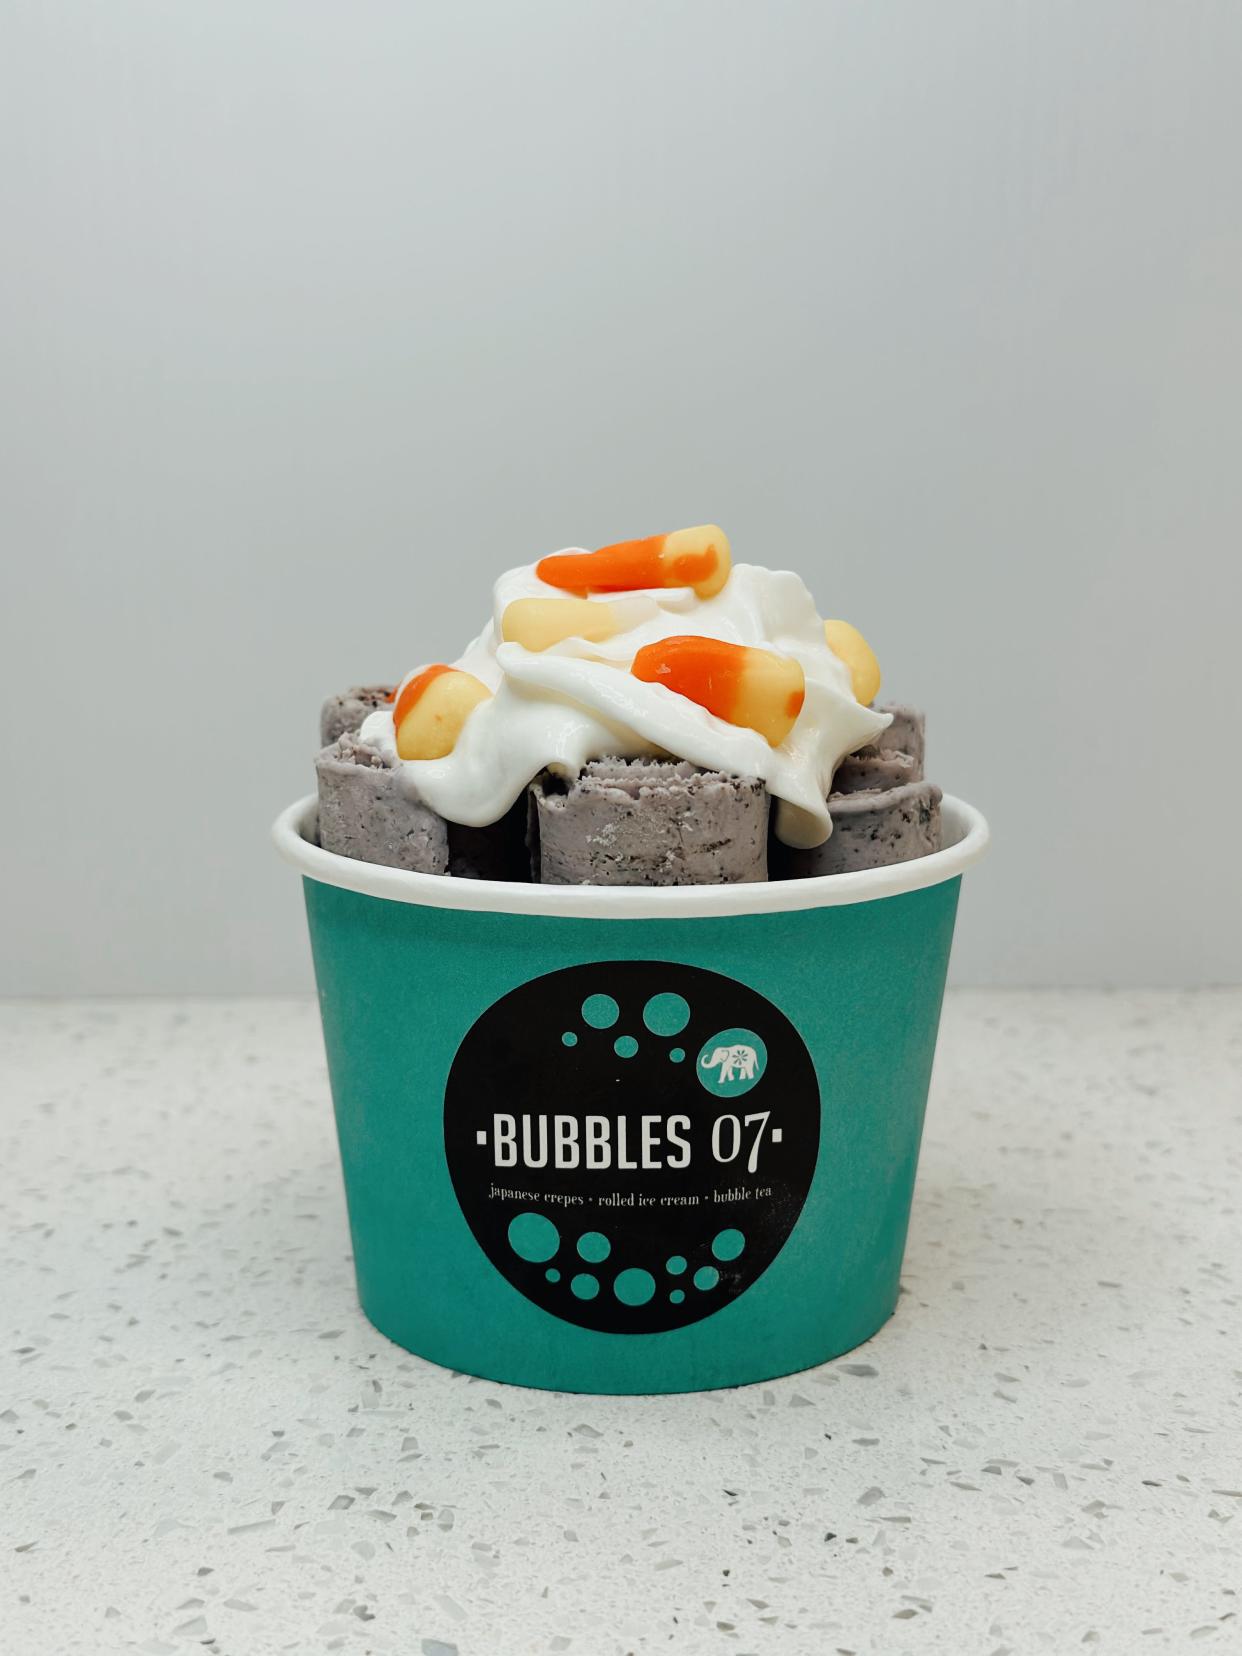 Monster Mash rolled ice cream (tarro Oreo vanilla rolled ice cream with whipped cream and candy corn) from Bubbles07 locations.